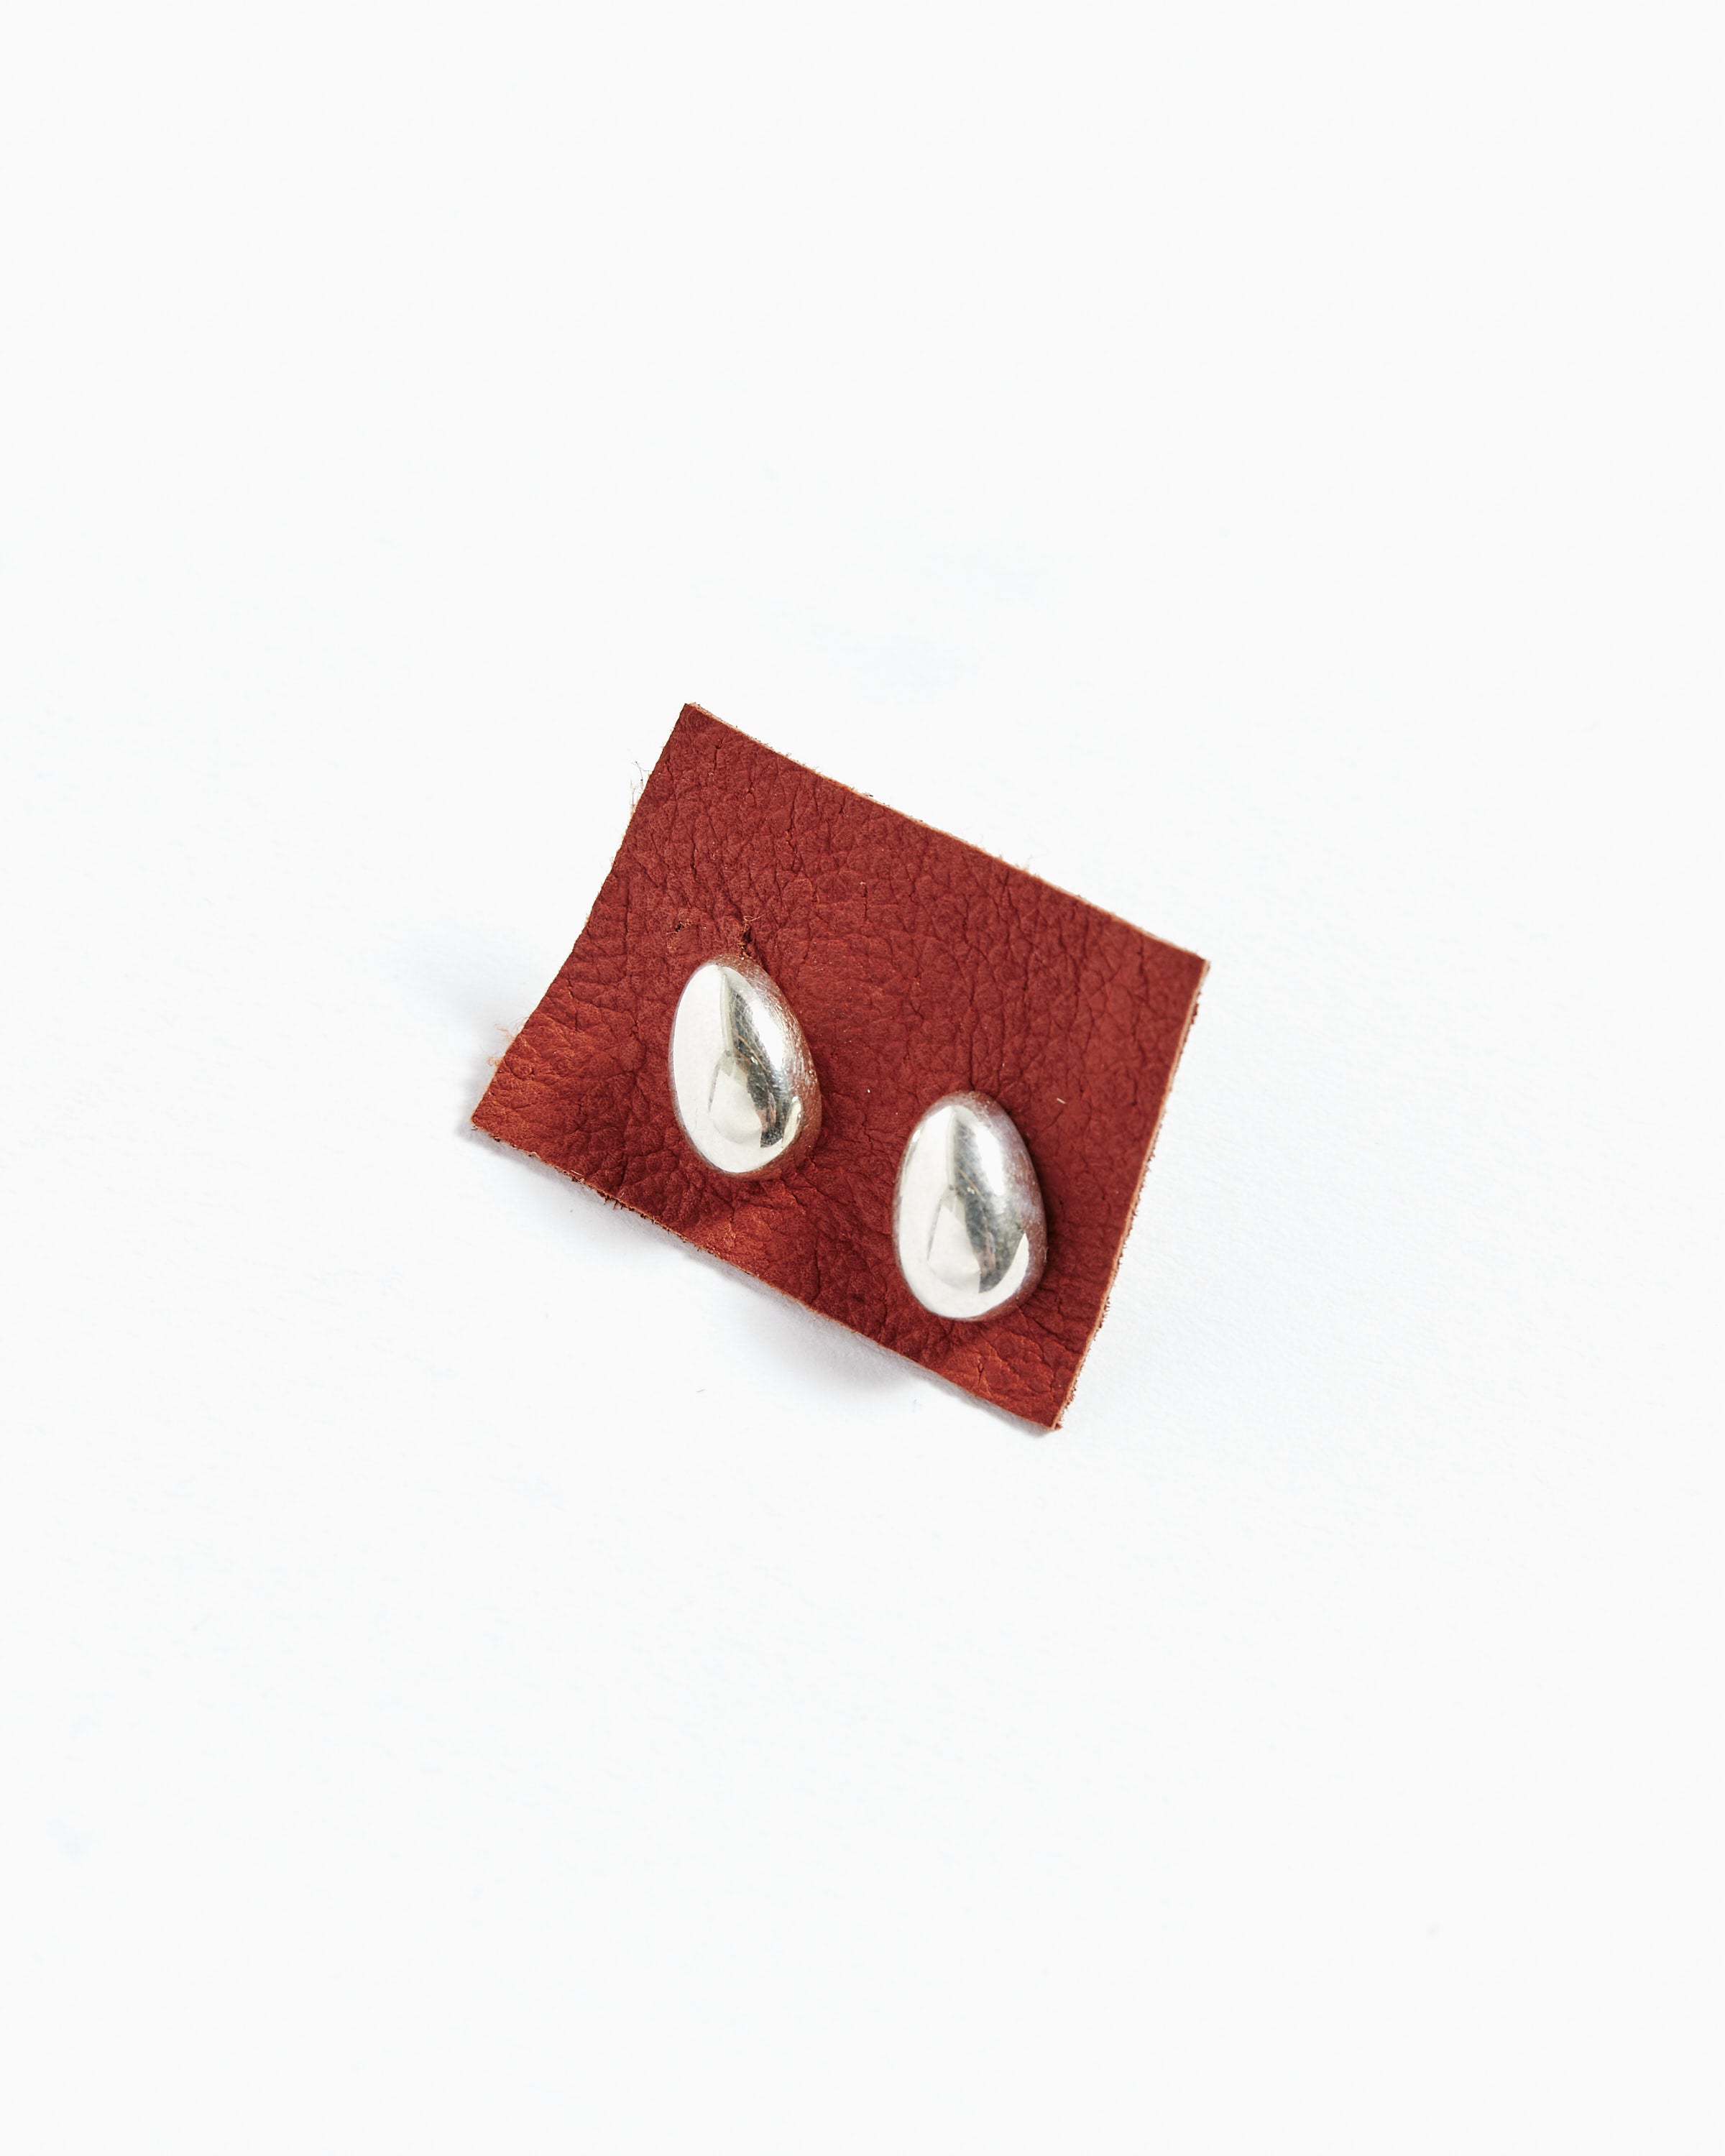 Tiny Egg Studs - Sterling Silver